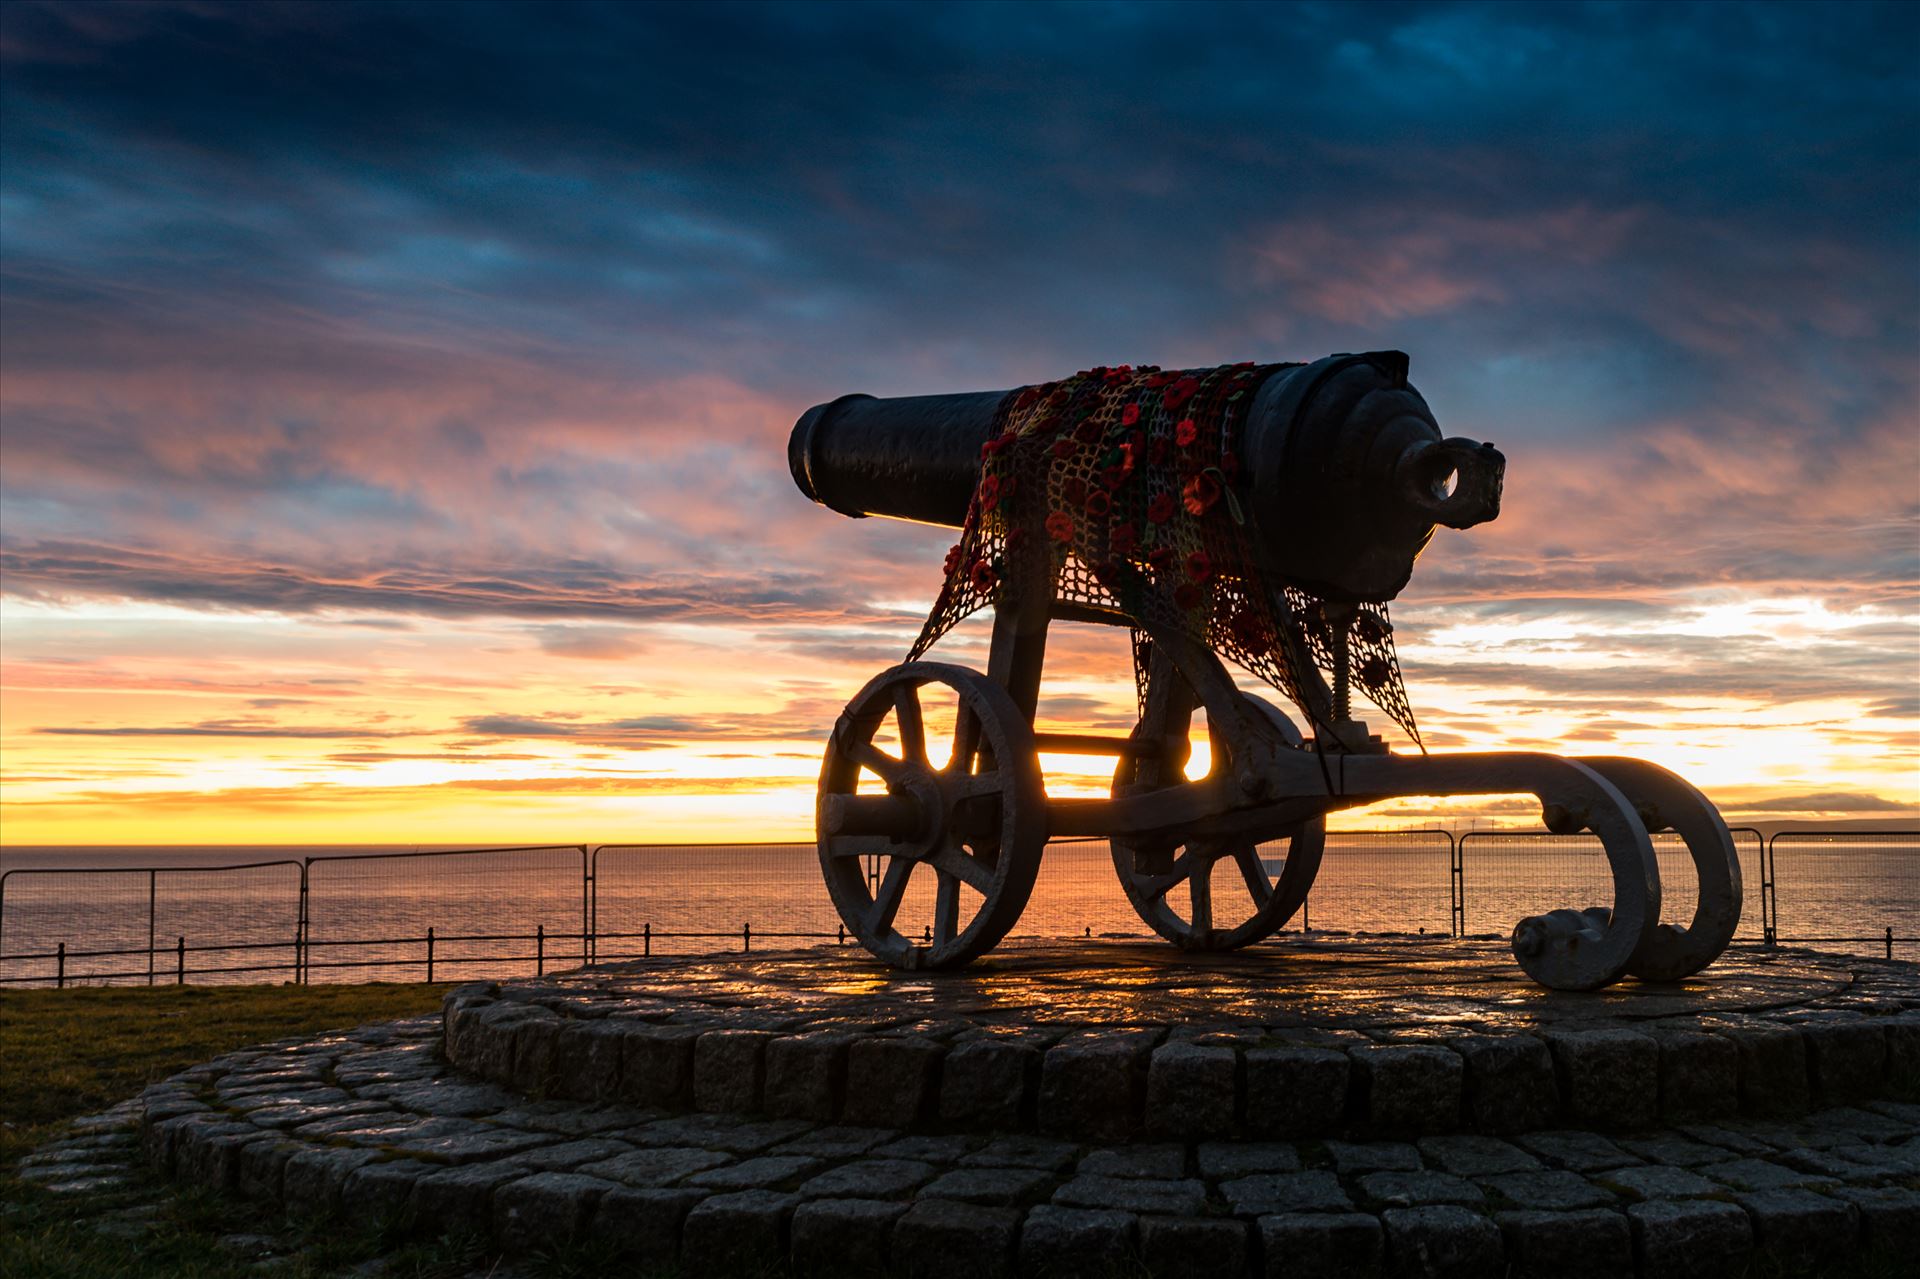 Cannon Sunrise - The Cannon at Hartlepool Headland at sunrise by AJ Stoves Photography